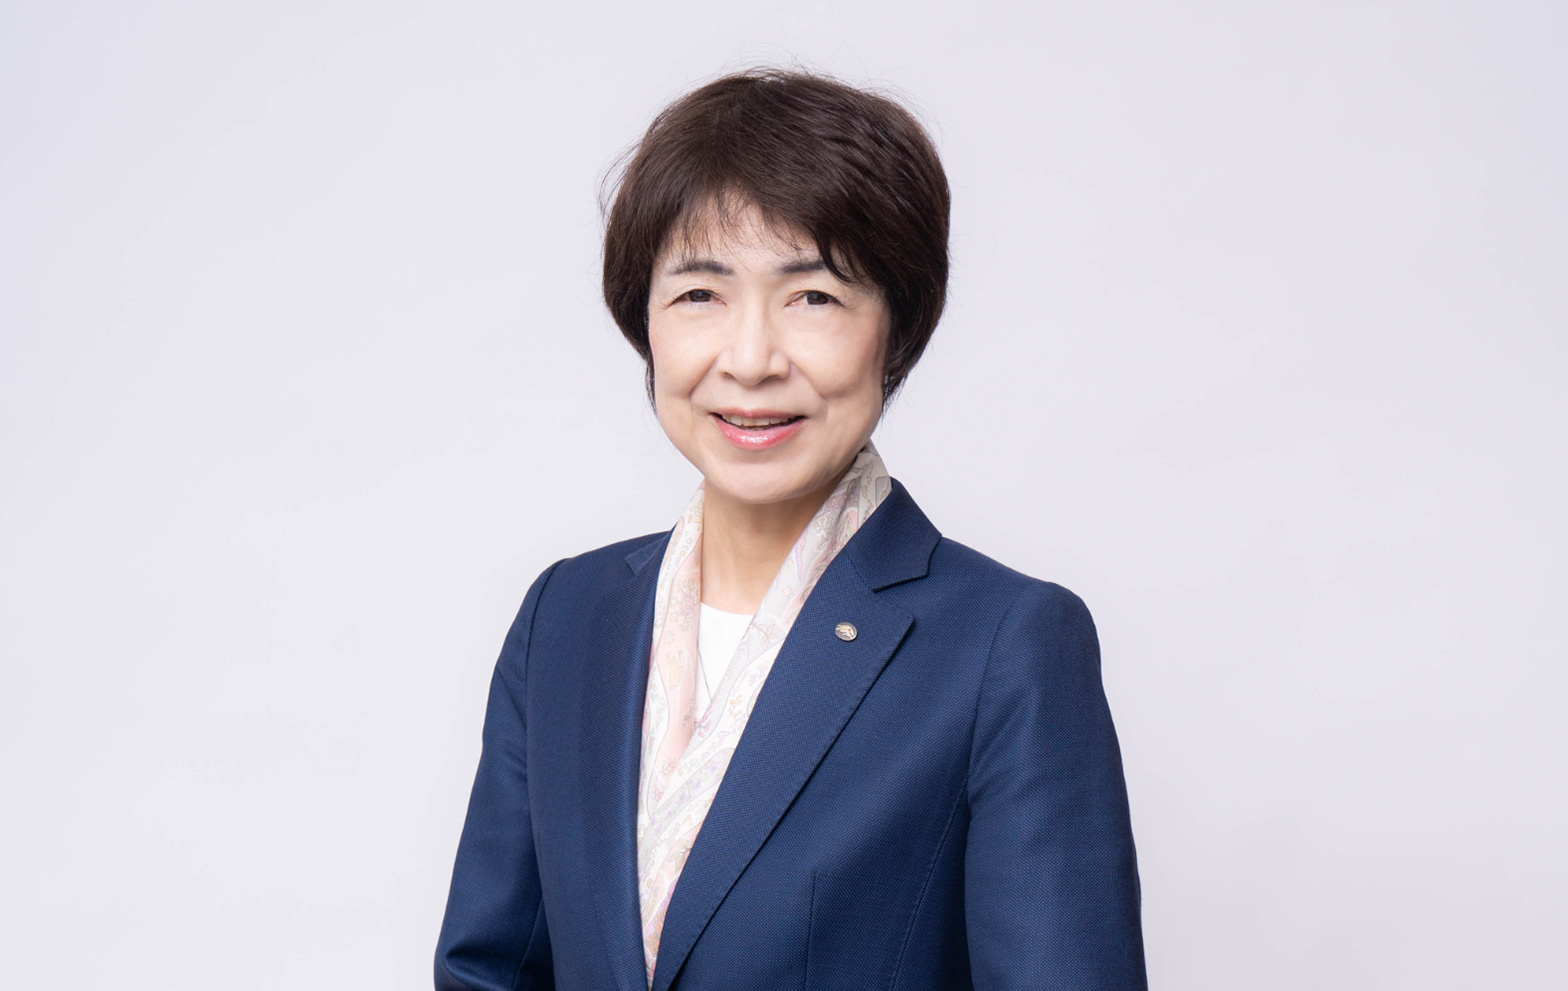 Junko Tsuboi Director of the Board, Senior Executive Vice President, Chief People Officer (Group Human Capital Management), Kirin Holdings Company, Limited